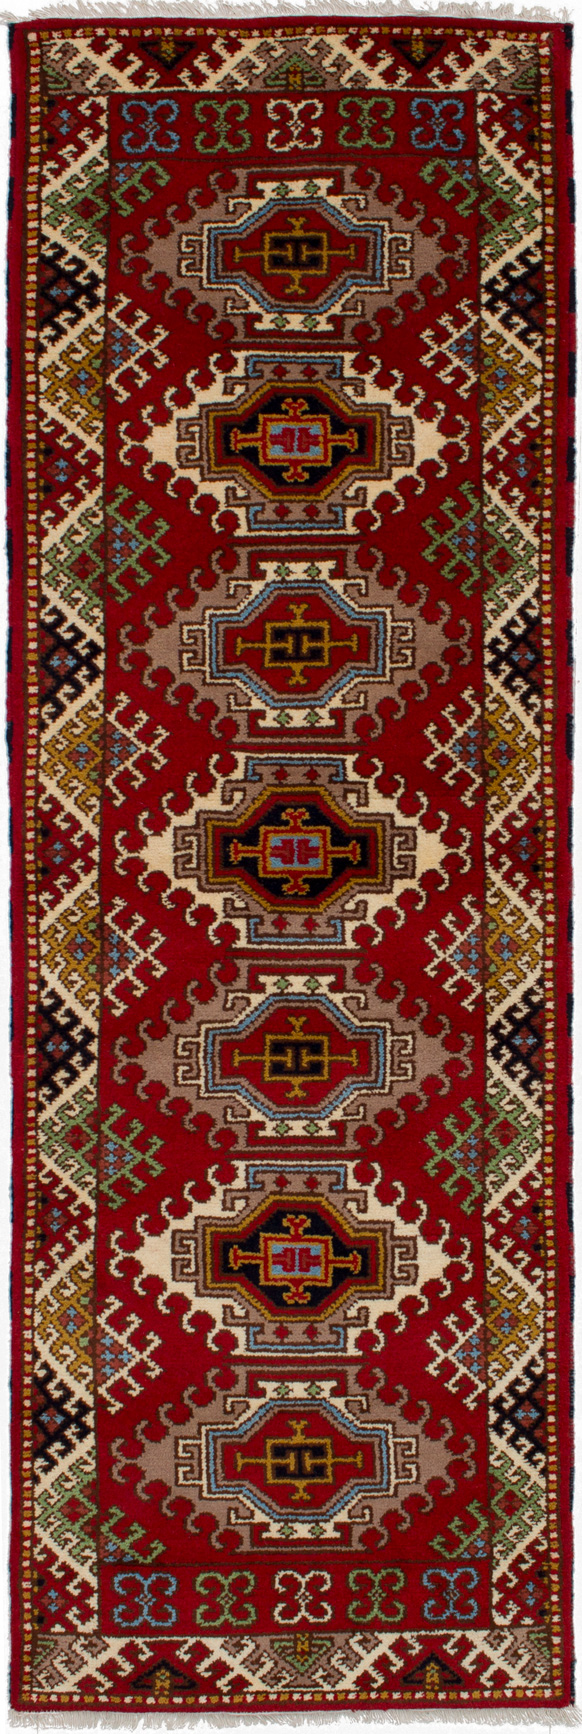 Hand-knotted Royal Kazak Red Wool Rug 2'9" x 8'4"  Size: 2'9" x 8'4"  